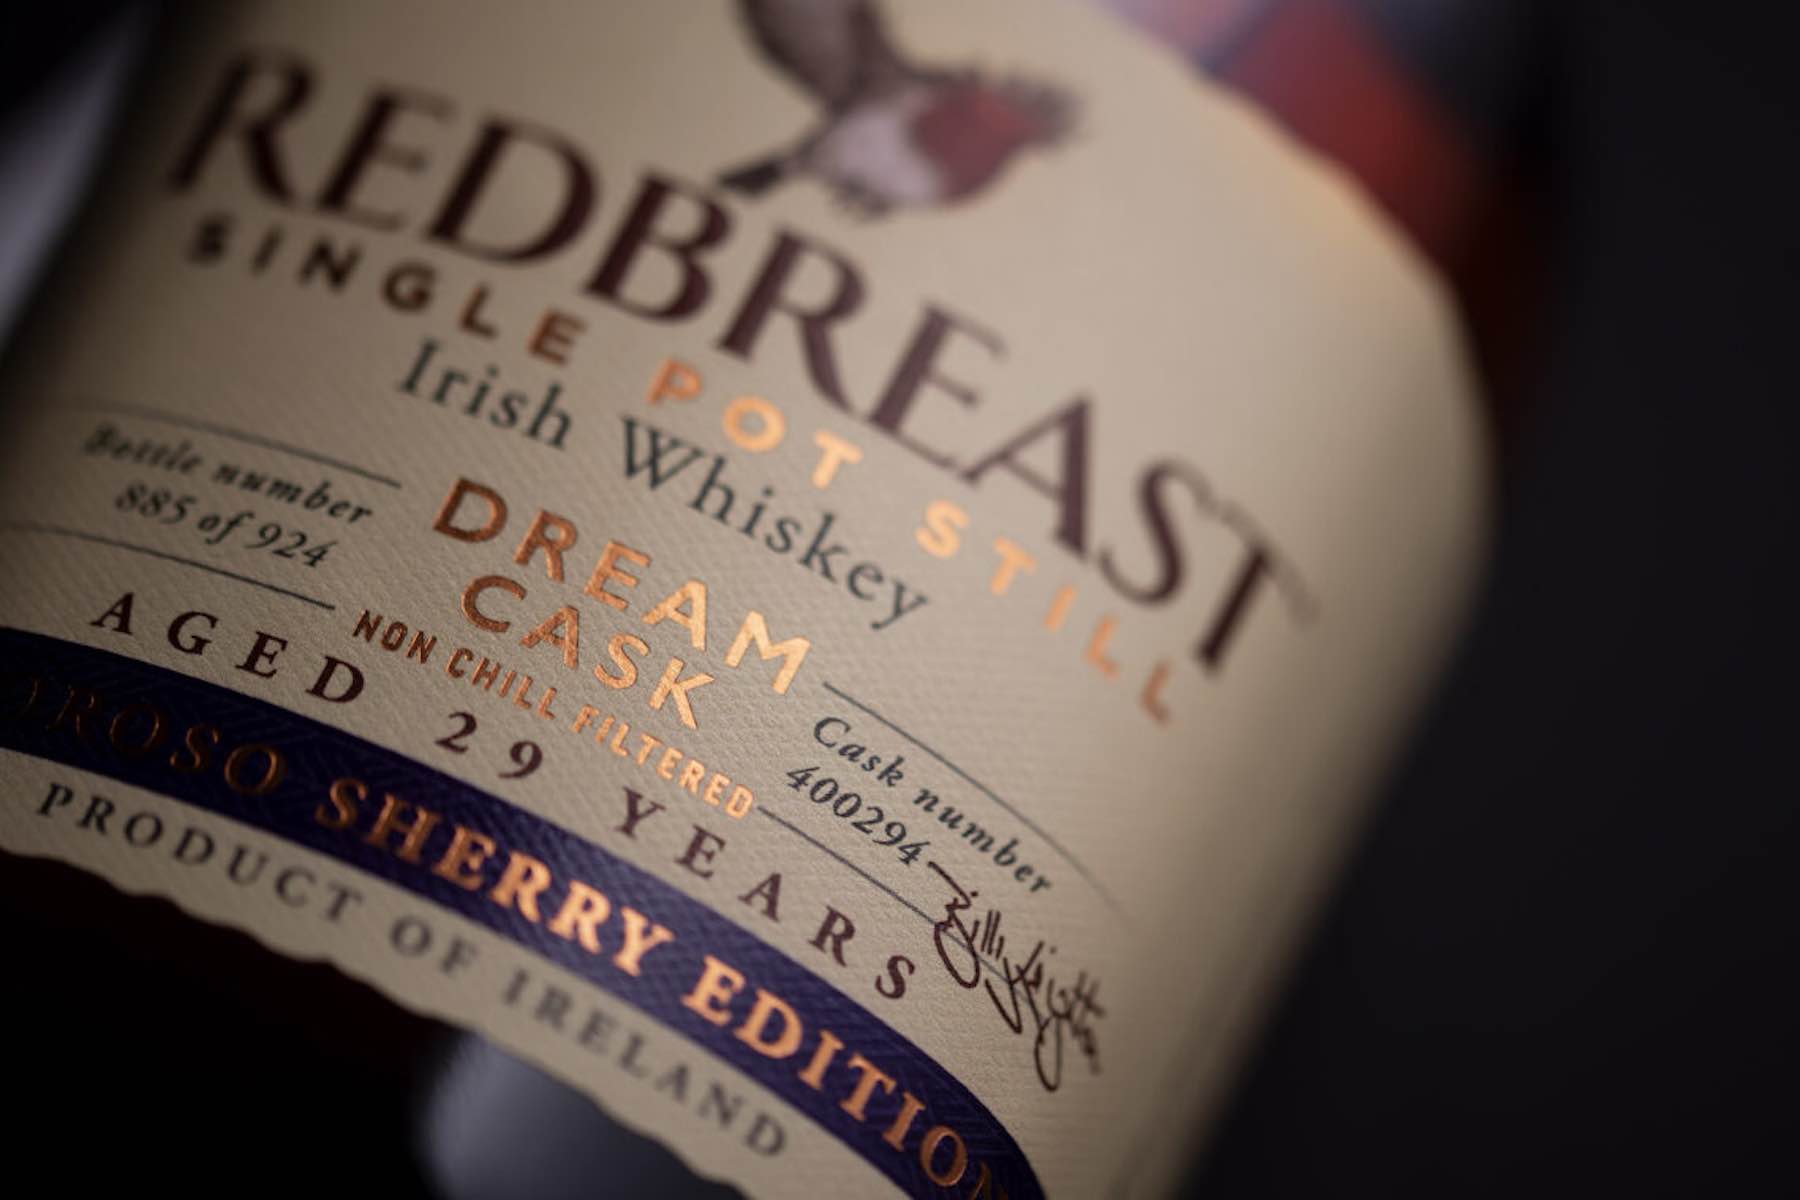 Redbreast Dream Cask Oloroso Sherry Edition, Review and Tasting Notes